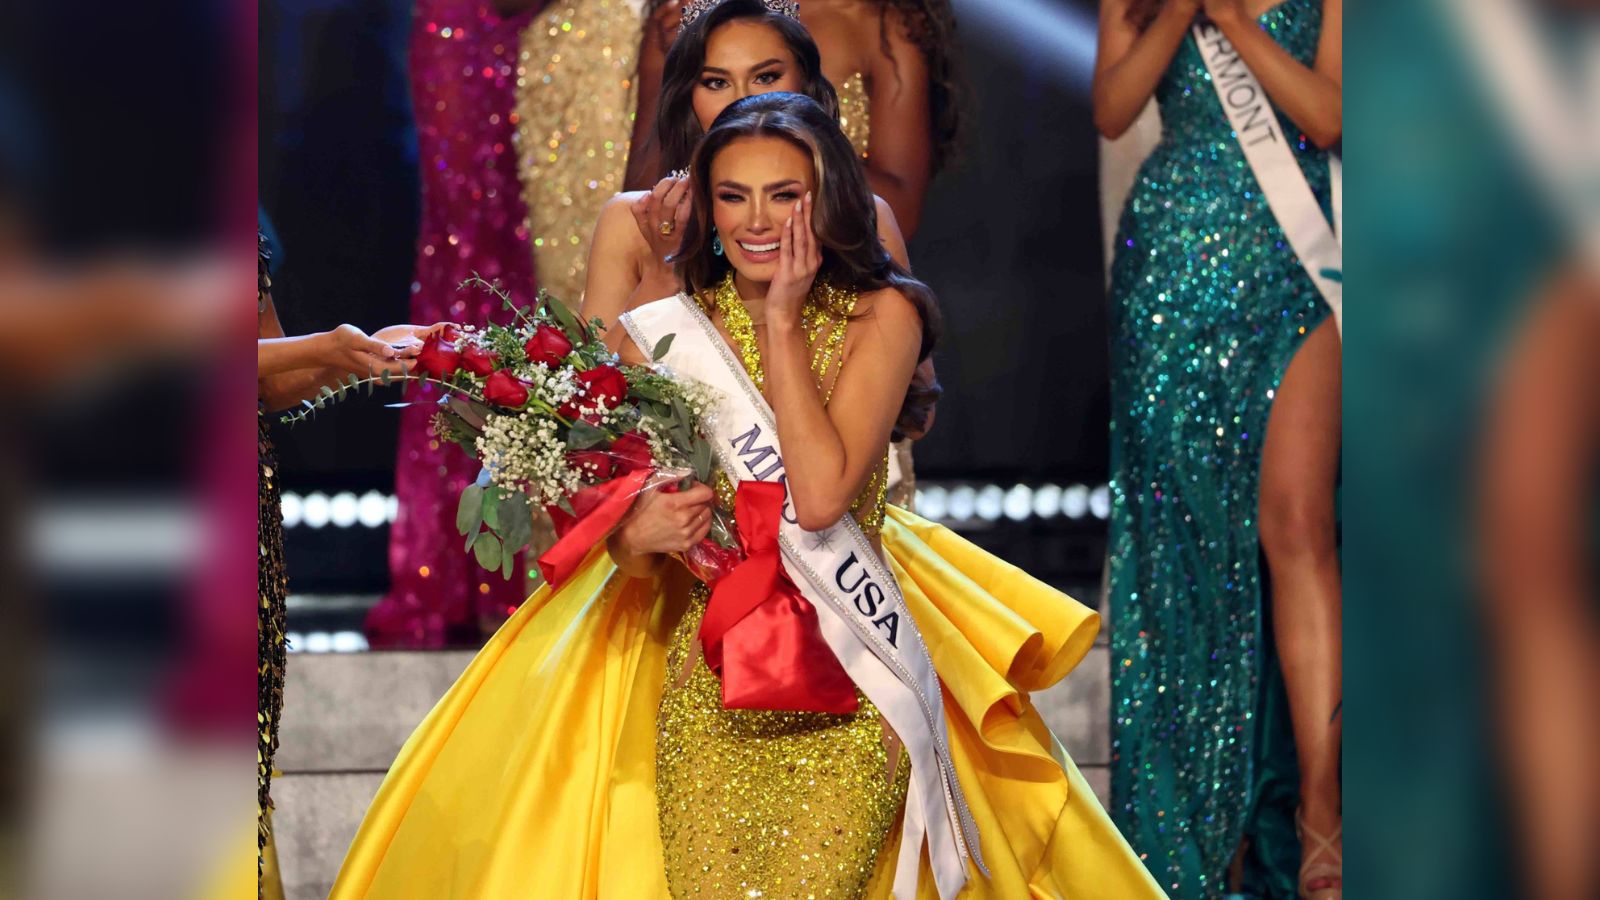 Noelia Voigt of Utah was crowned the new Miss USA in Reno, Nevada, at the culmination of the 2023 p...